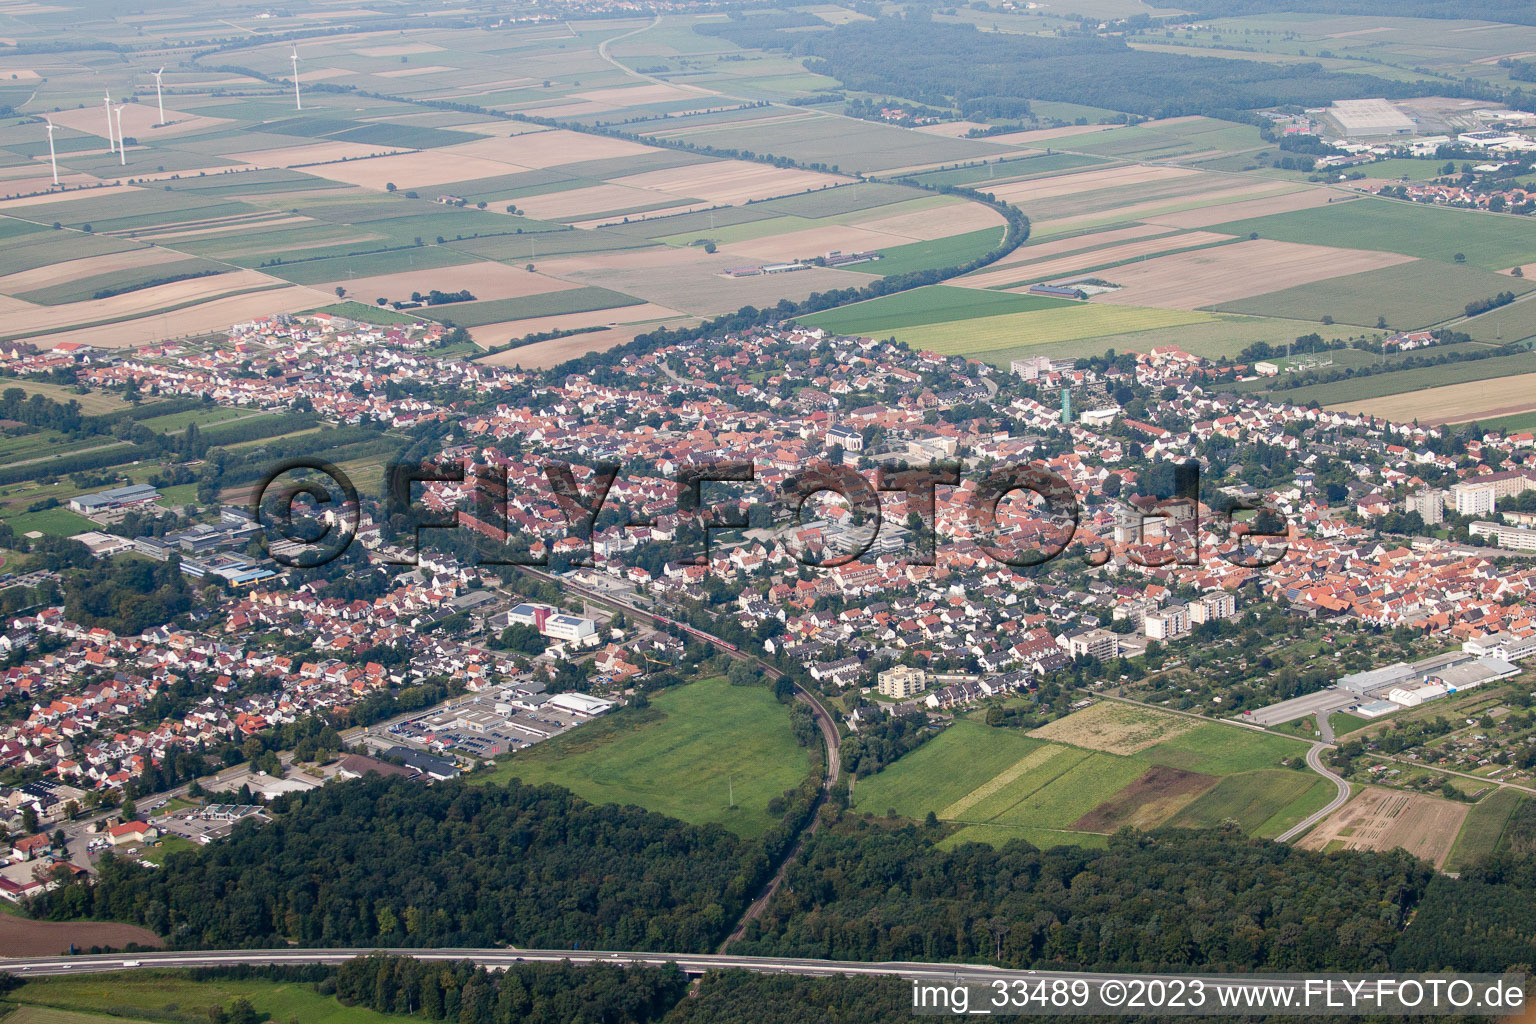 Oblique view of From the southeast in Kandel in the state Rhineland-Palatinate, Germany